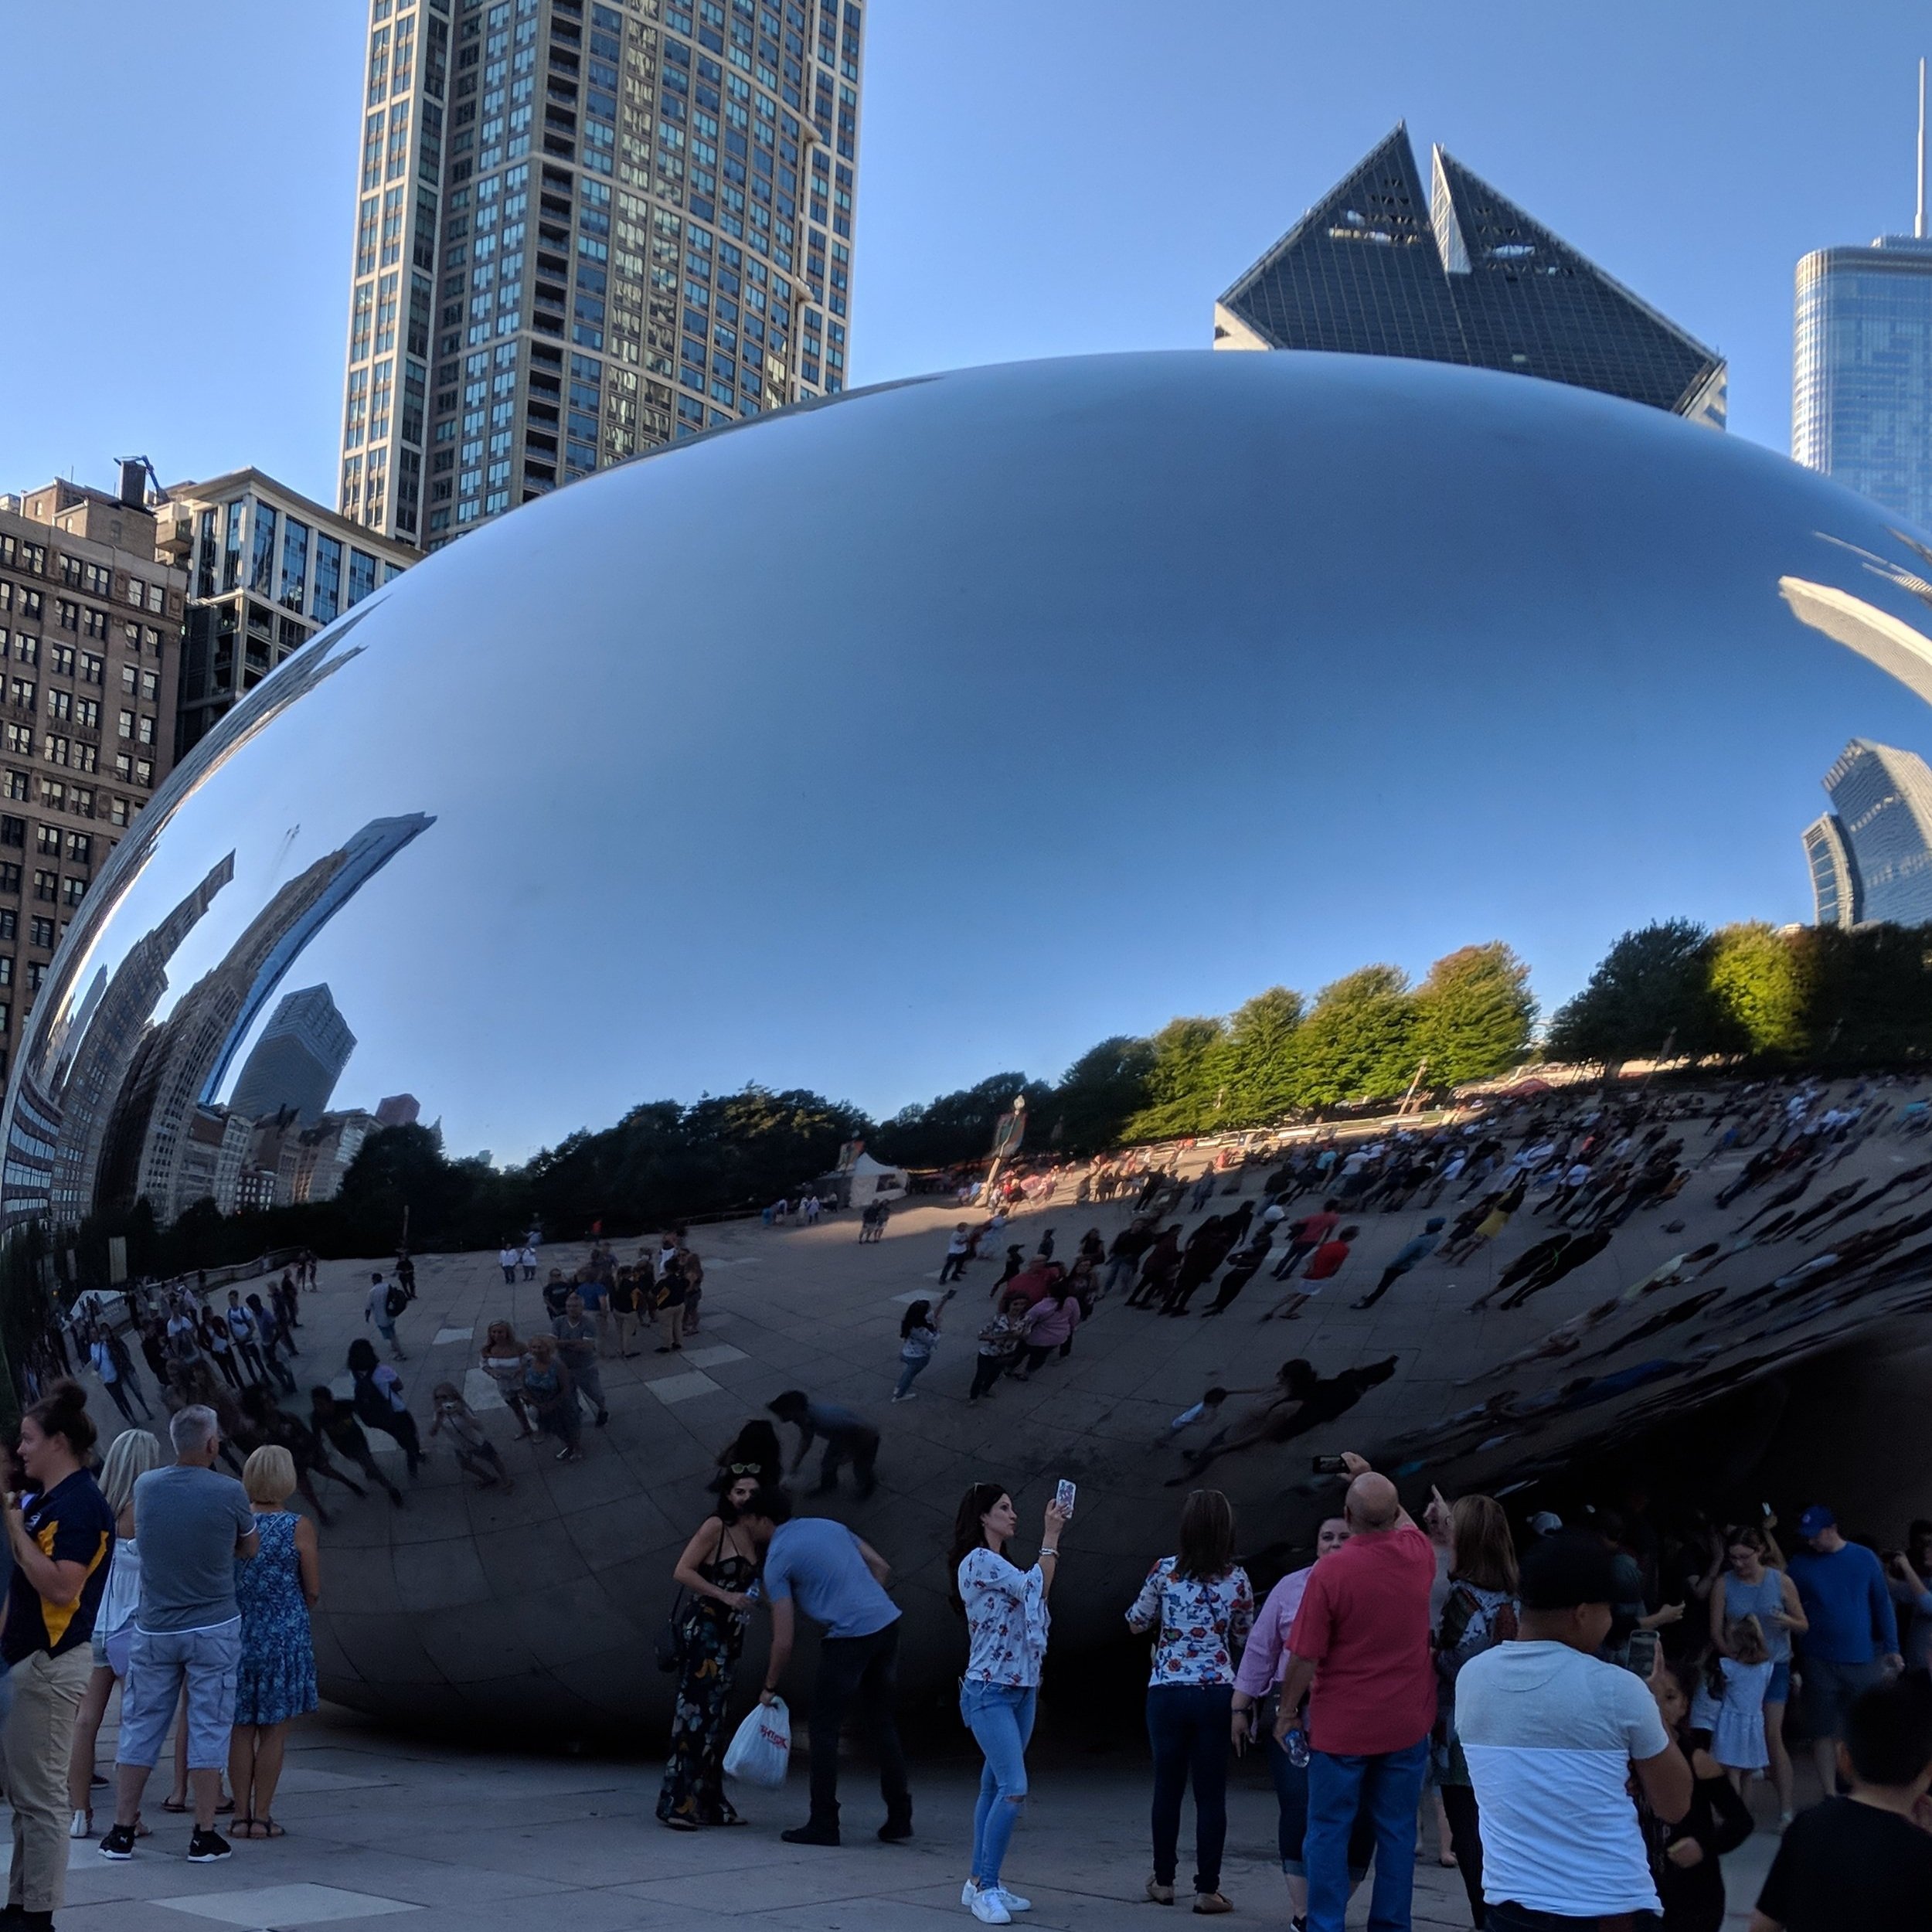 Anish Kapoor, 'Cloud Gate', stainless steel, 2006